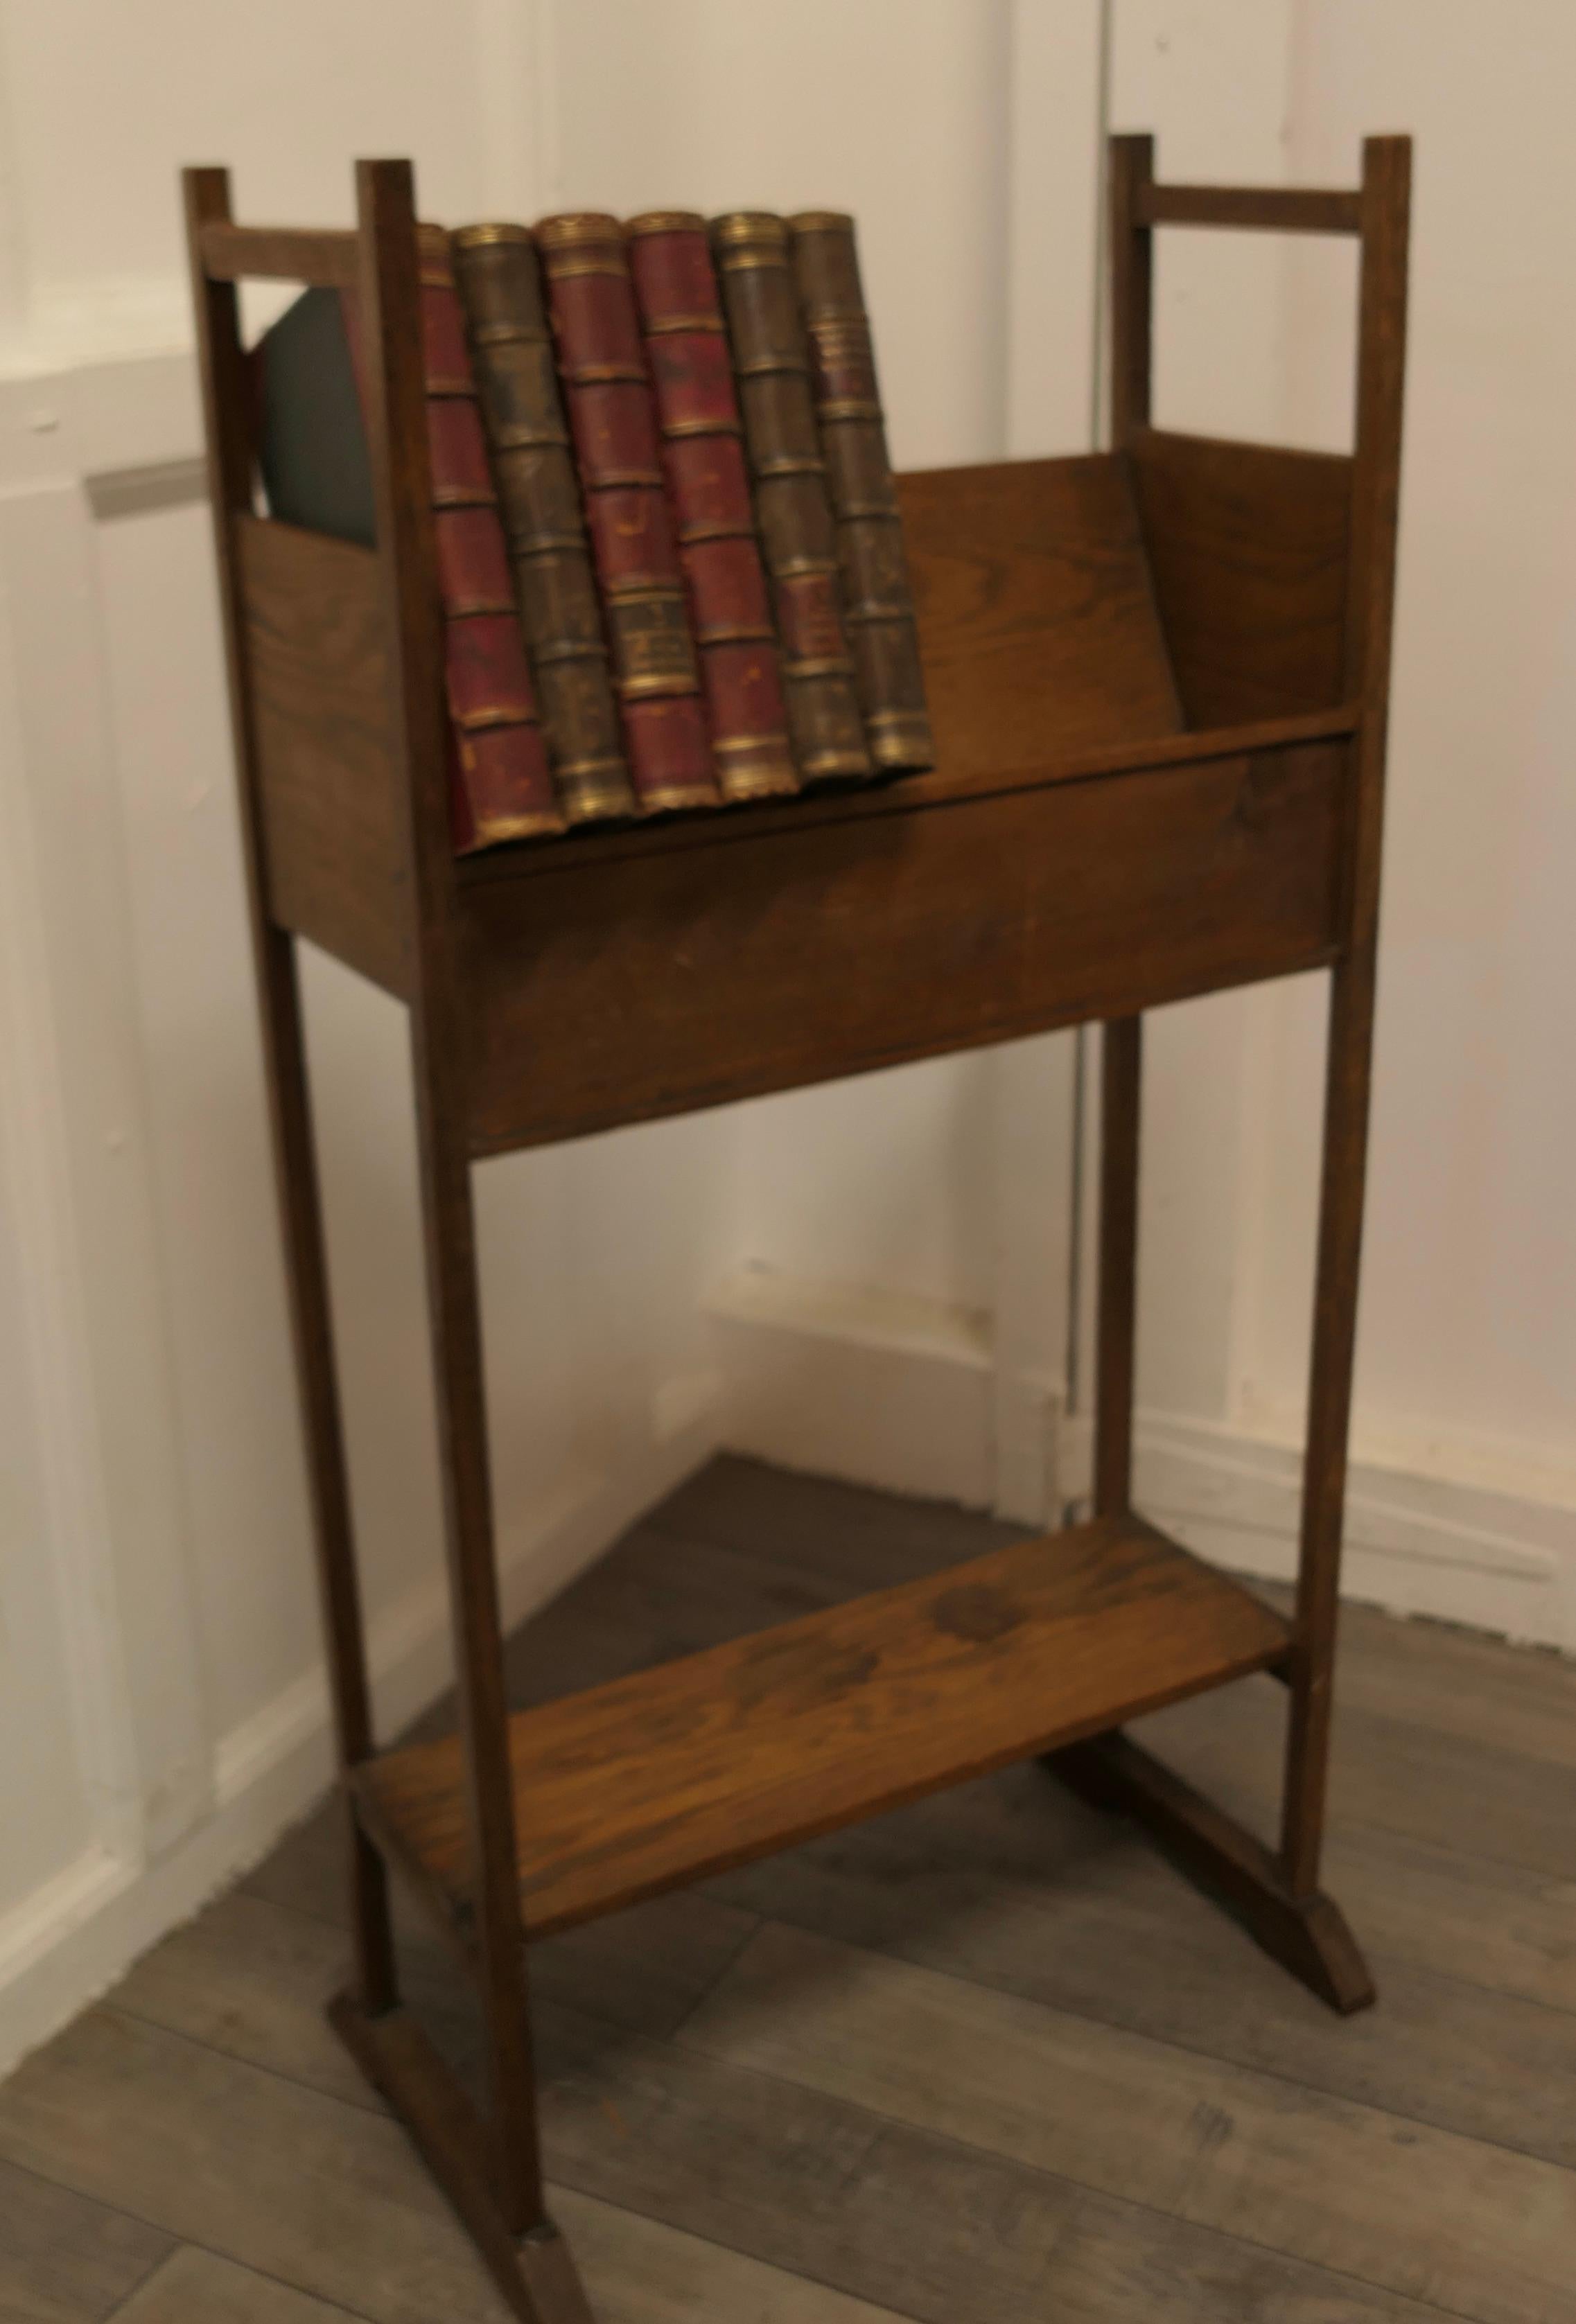 Arts & Crafts Oak Slope-Shelf Bookcase with Undertier.

This small Oak bookcase has an open slope-shelf at the top and a flat shelf at the bottom 
The shelf has lifting handles at the top and would work well in a small space where a bookshelf is